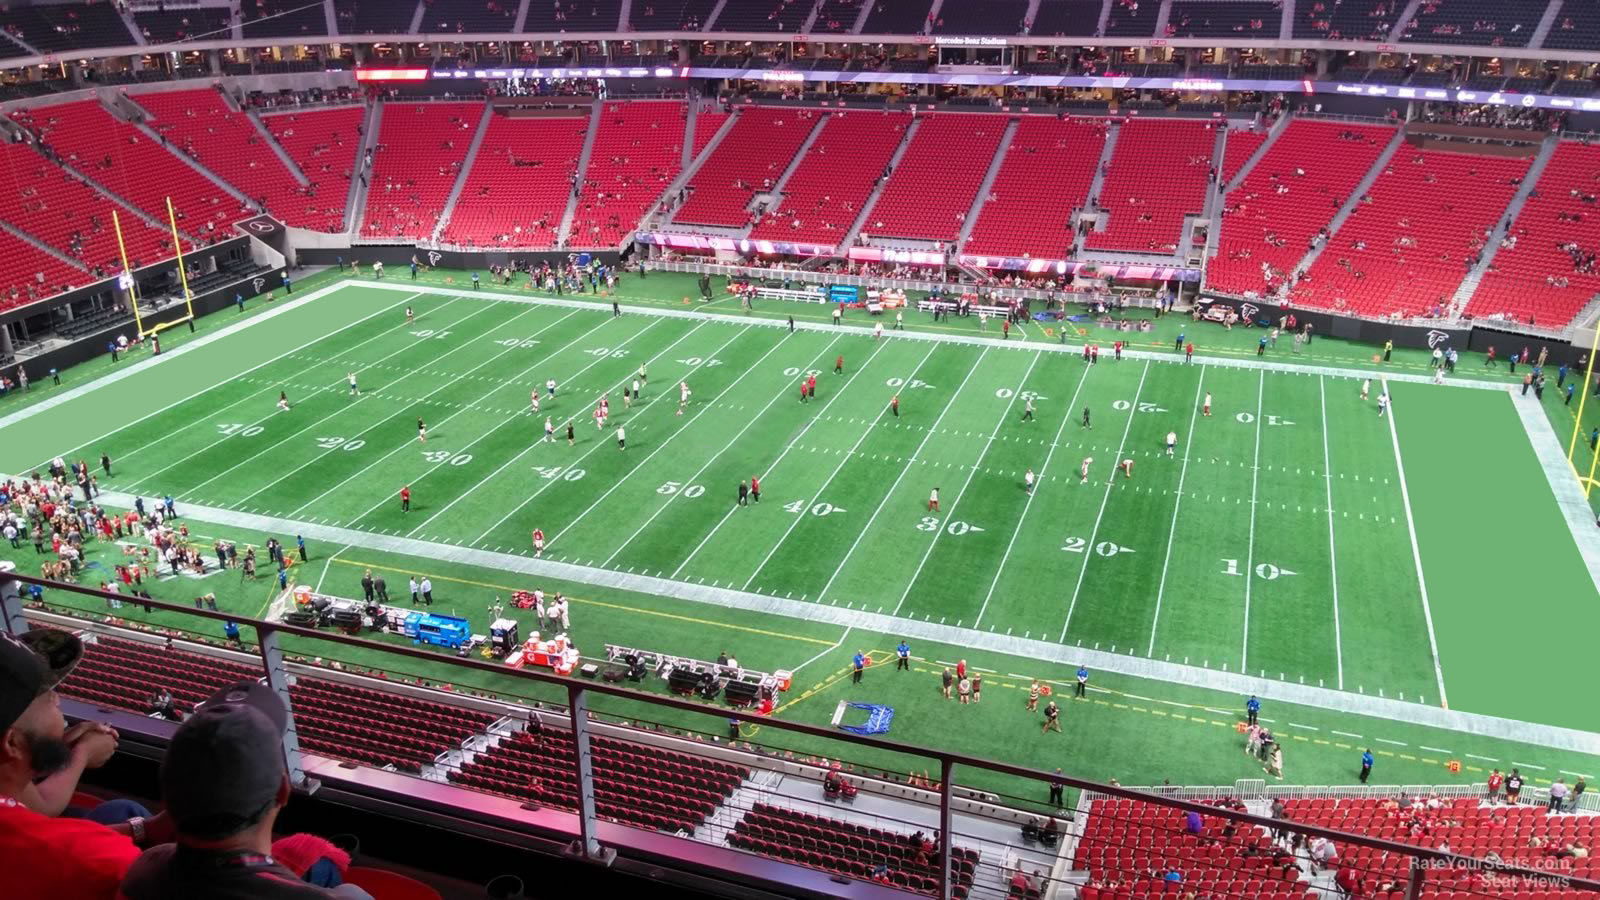 section 309, row 4 seat view  for football - mercedes-benz stadium